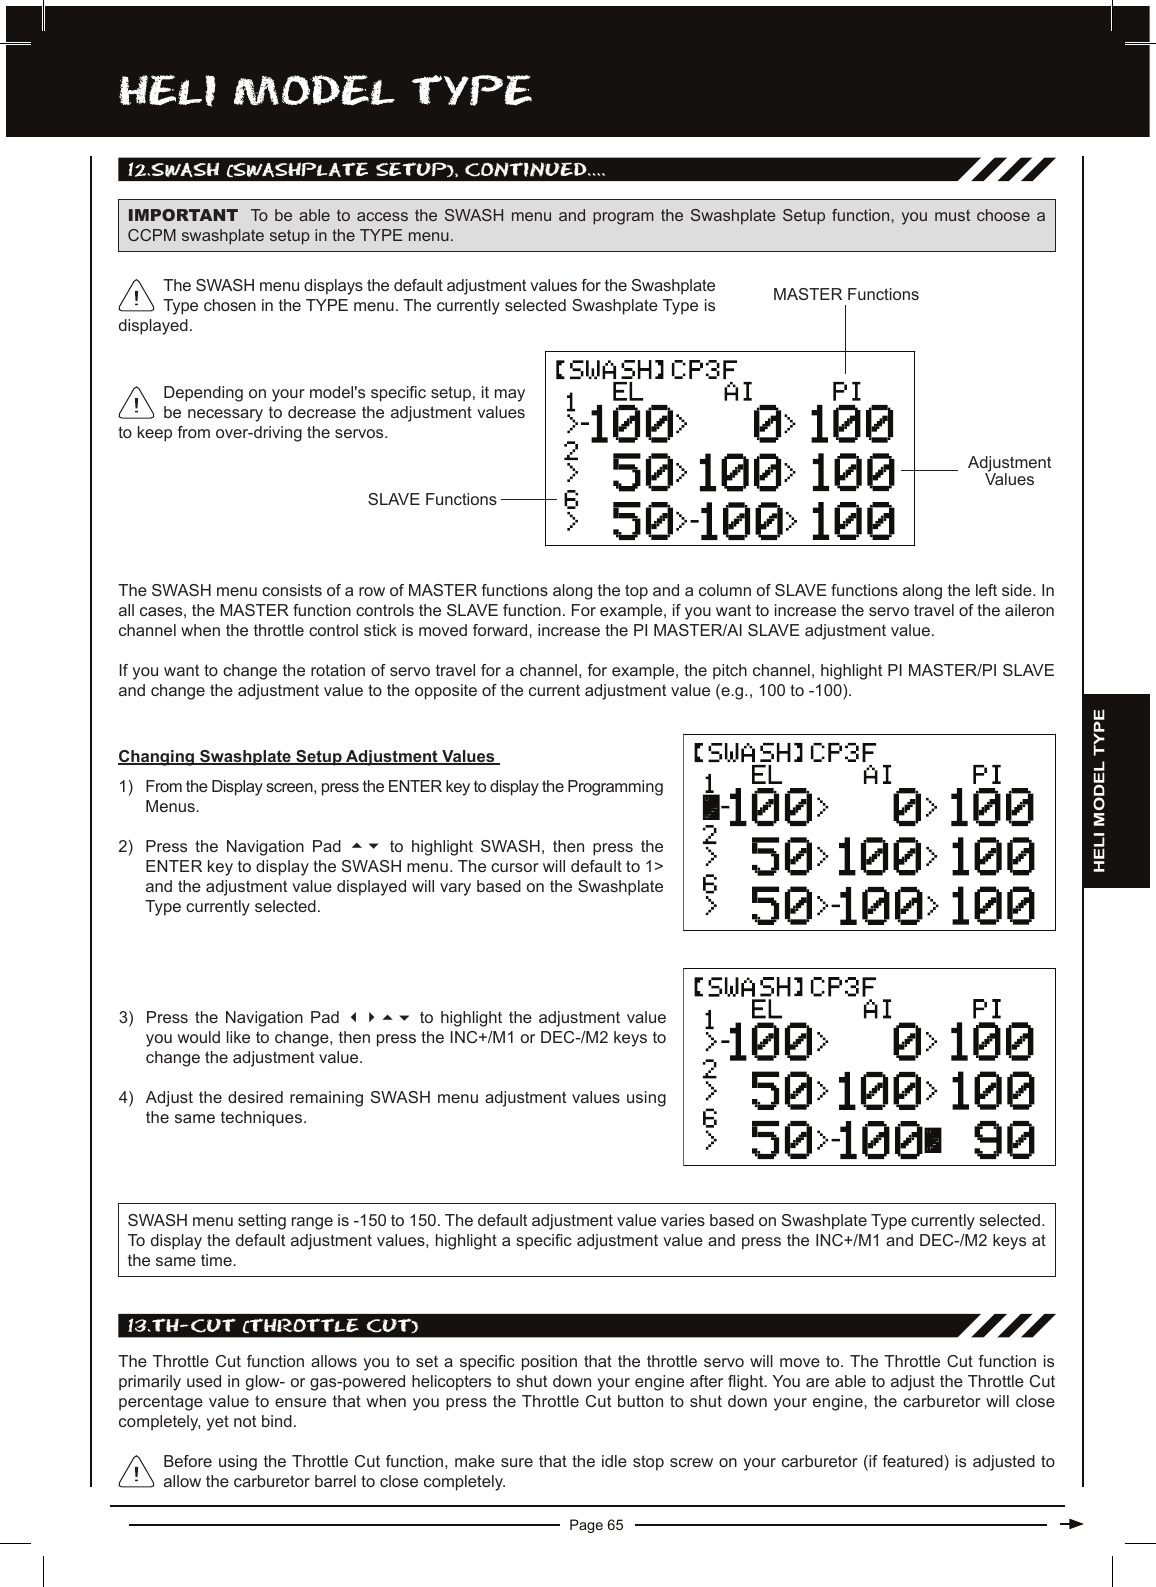 Page 65hELi MODEL TyPE12.SwaSh (SwaShPLaTE SETUP), cOnTinUED....IMPORTANT To be able to access the  SWASH menu and program the  Swashplate Setup  function, you must choose a CCPM swashplate setup in the TYPE menu.The SWASH menu consists of a row of MASTER functions along the top and a column of SLAVE functions along the left side. In all cases, the MASTER function controls the SLAVE function. For example, if you want to increase the servo travel of the aileron channel when the throttle control stick is moved forward, increase the PI MASTER/AI SLAVE adjustment value.If you want to change the rotation of servo travel for a channel, for example, the pitch channel, highlight PI MASTER/PI SLAVE and change the adjustment value to the opposite of the current adjustment value (e.g., 100 to -100).SLAVE FunctionsAdjustmentValuesMASTER FunctionsDepending on your model&apos;s specic setup, it may be necessary to decrease the adjustment values to keep from over-driving the servos.The SWASH menu displays the default adjustment values for the Swashplate Type chosen in the TYPE menu. The currently selected Swashplate Type is displayed.Changing Swashplate Setup Adjustment Values 1) From the Display screen, press the ENTER key to display the Programming Menus.2) Press  the  Navigation  Pad  56 to  highlight  SWASH,  then  press  the ENTER key to display the SWASH menu. The cursor will default to 1&gt; and the adjustment value displayed will vary based on the Swashplate Type currently selected.3) Press  the  Navigation  Pad  3456 to  highlight  the  adjustment  value you would like to change, then press the INC+/M1 or DEC-/M2 keys to change the adjustment value.4) Adjust the desired remaining SWASH menu adjustment values using the same techniques.SWASH menu setting range is -150 to 150. The default adjustment value varies based on Swashplate Type currently selected. To display the default adjustment values, highlight a specic adjustment value and press the INC+/M1 and DEC-/M2 keys at the same time.13.Th-cUT (ThROTTLE cUT)The Throttle Cut function allows you to set a specic position that the throttle servo will move to. The Throttle Cut function is primarily used in glow- or gas-powered helicopters to shut down your engine after ight. You are able to adjust the Throttle Cut percentage value to ensure that when you press the Throttle Cut button to shut down your engine, the carburetor will close completely, yet not bind.Before using the Throttle Cut function, make sure that the idle stop screw on your carburetor (if featured) is adjusted to allow the carburetor barrel to close completely.HELI MODEL TYPE